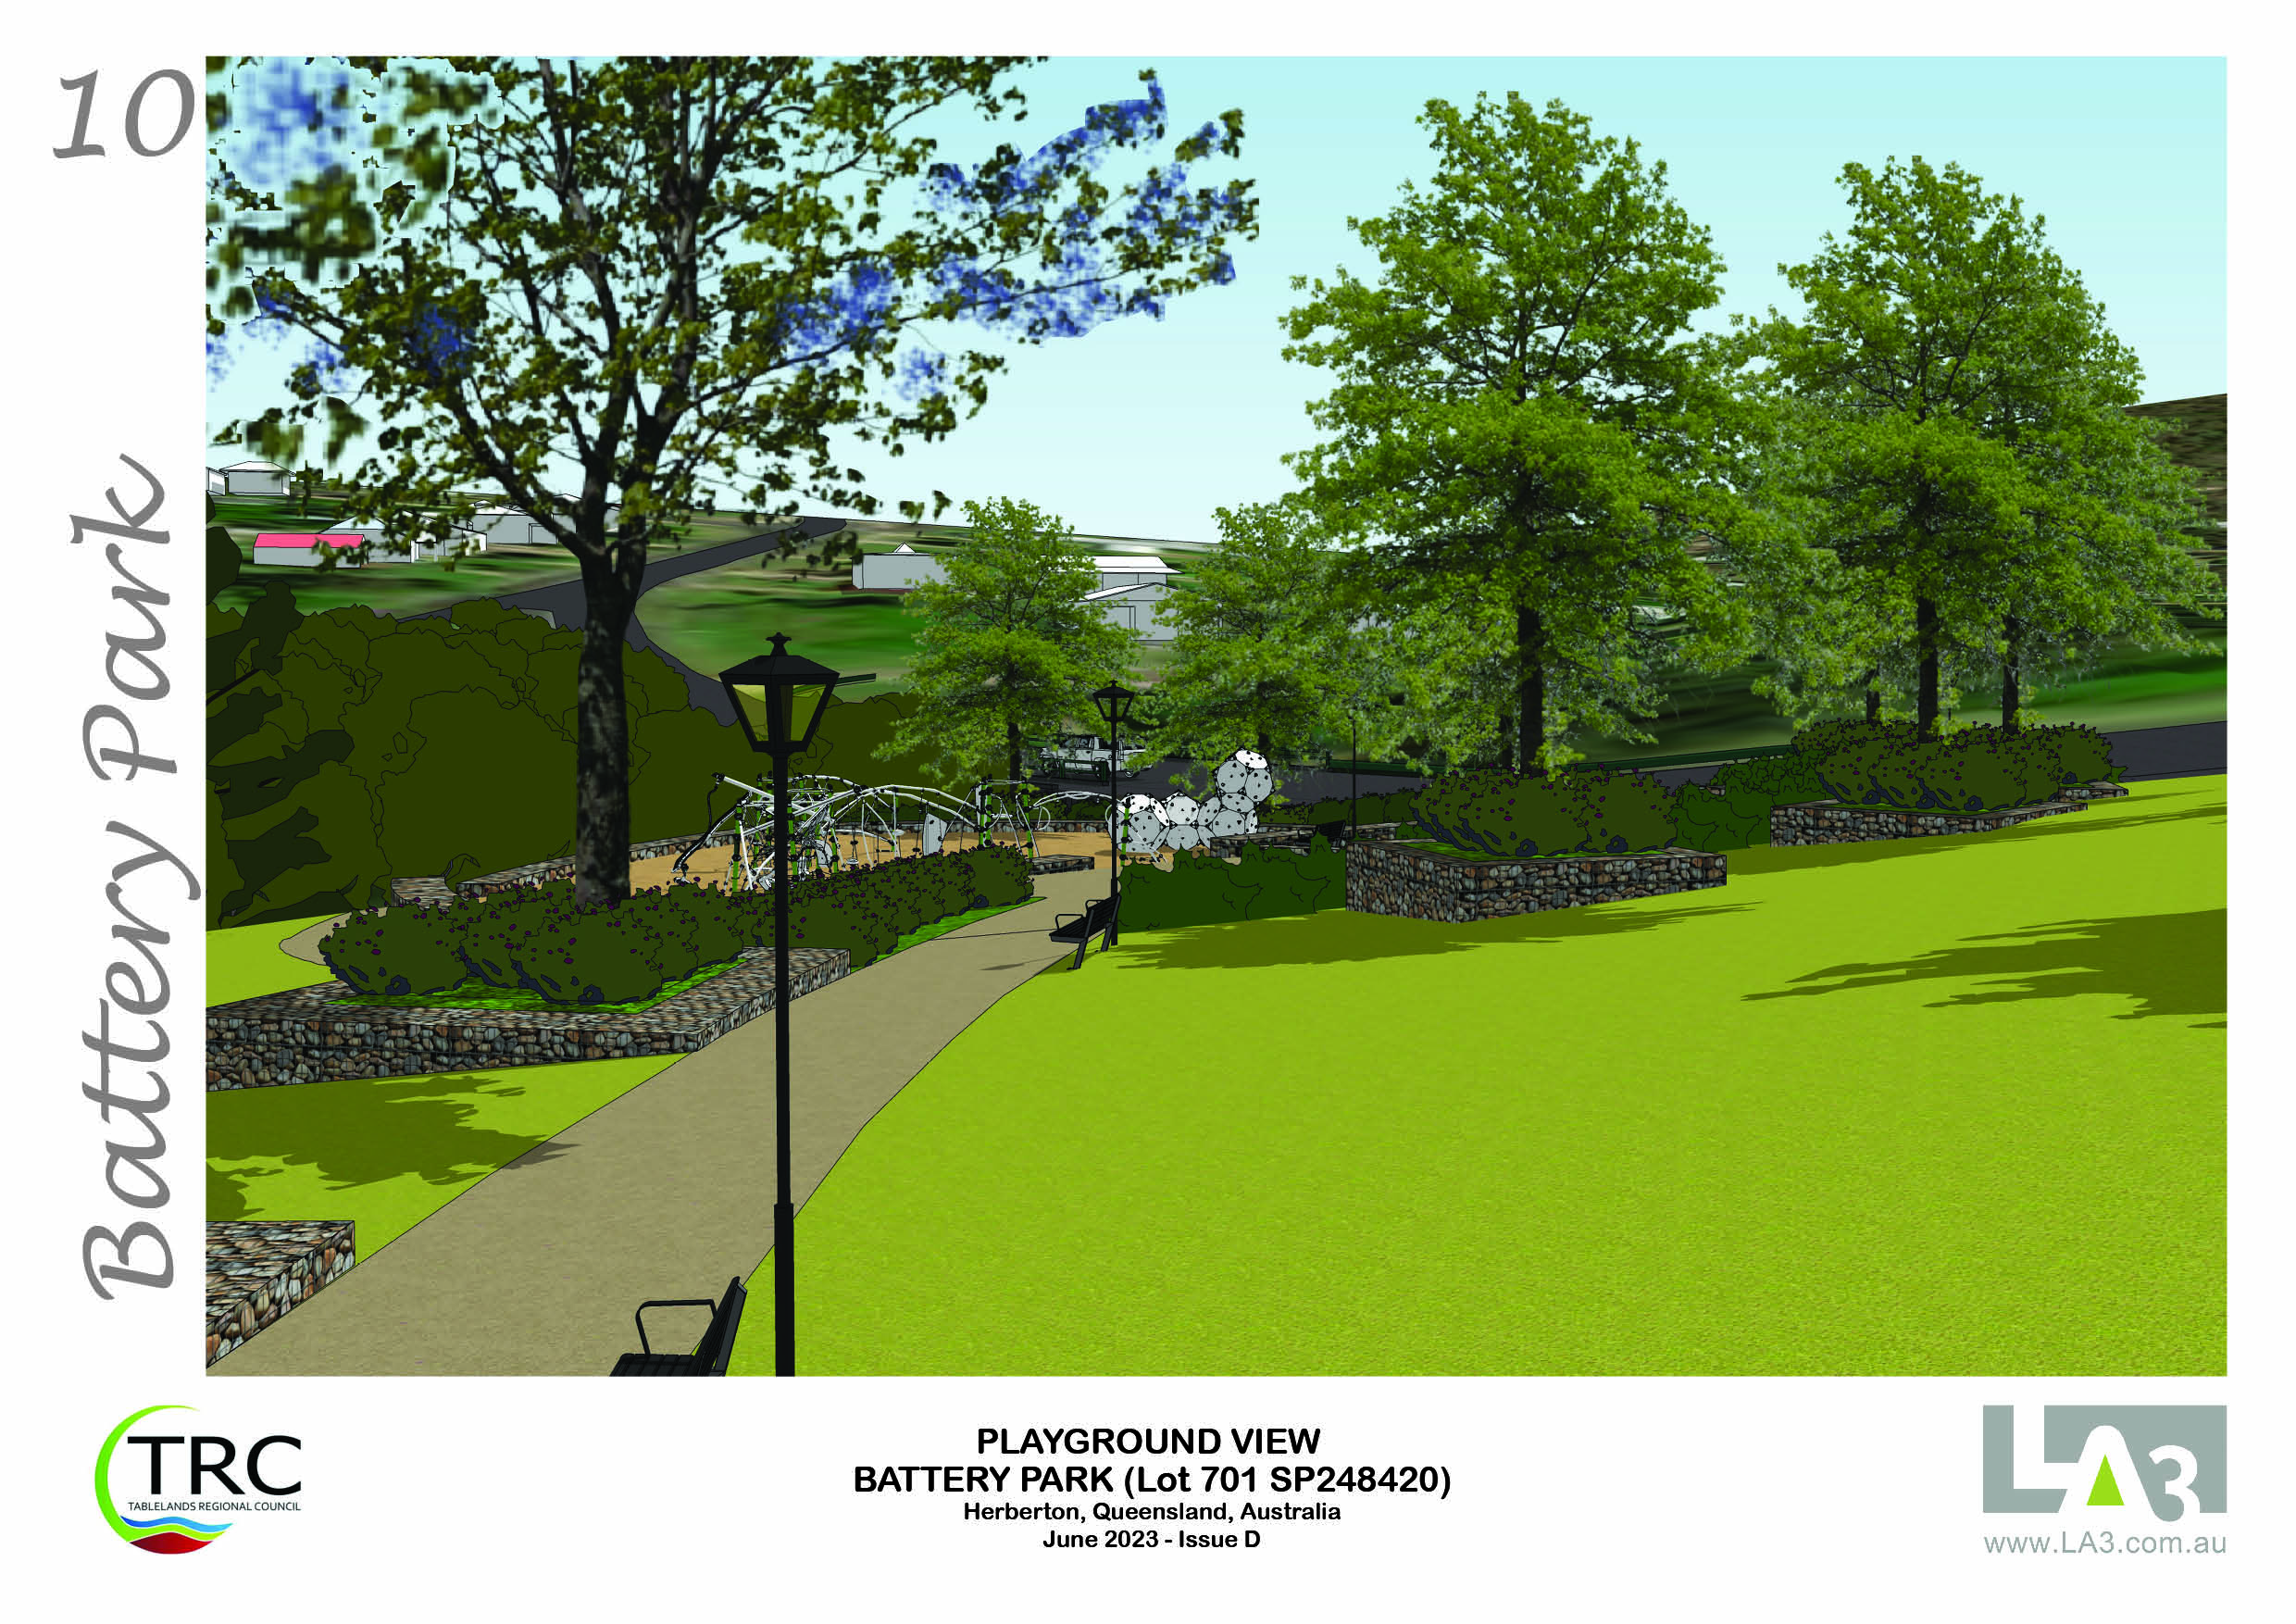 An artist impression of Herberton Battery Park including a path, landscaping and a playground